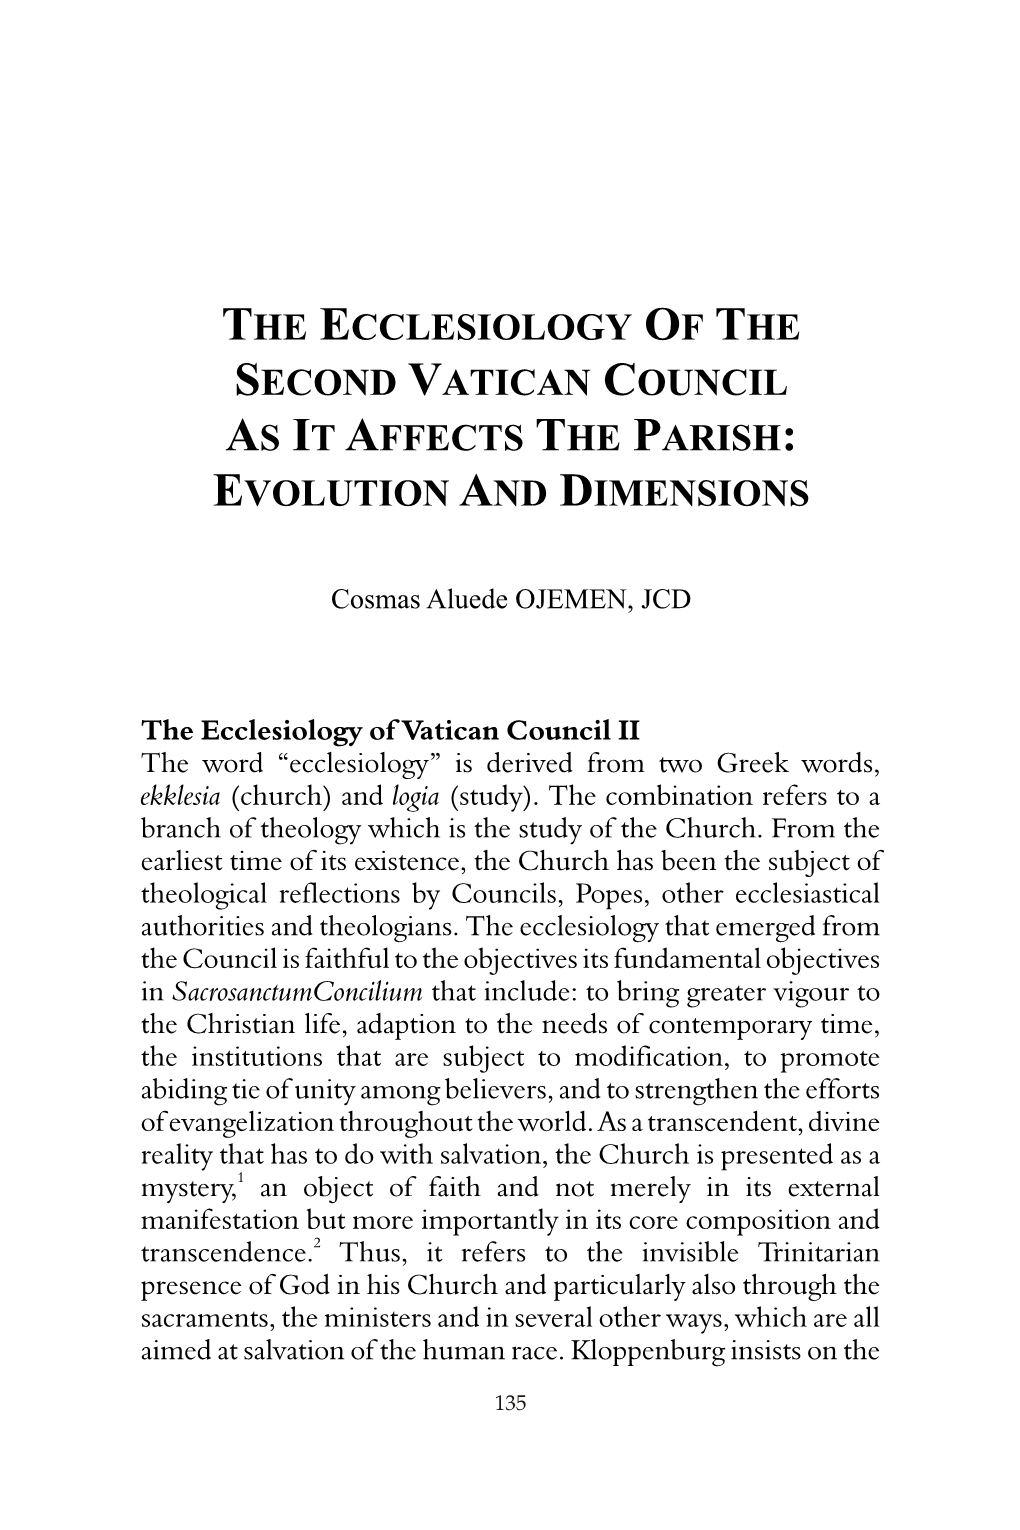 The Ecclesiology of the Second Vatican Council As It Affects the Parish: Evolution and Dimensions